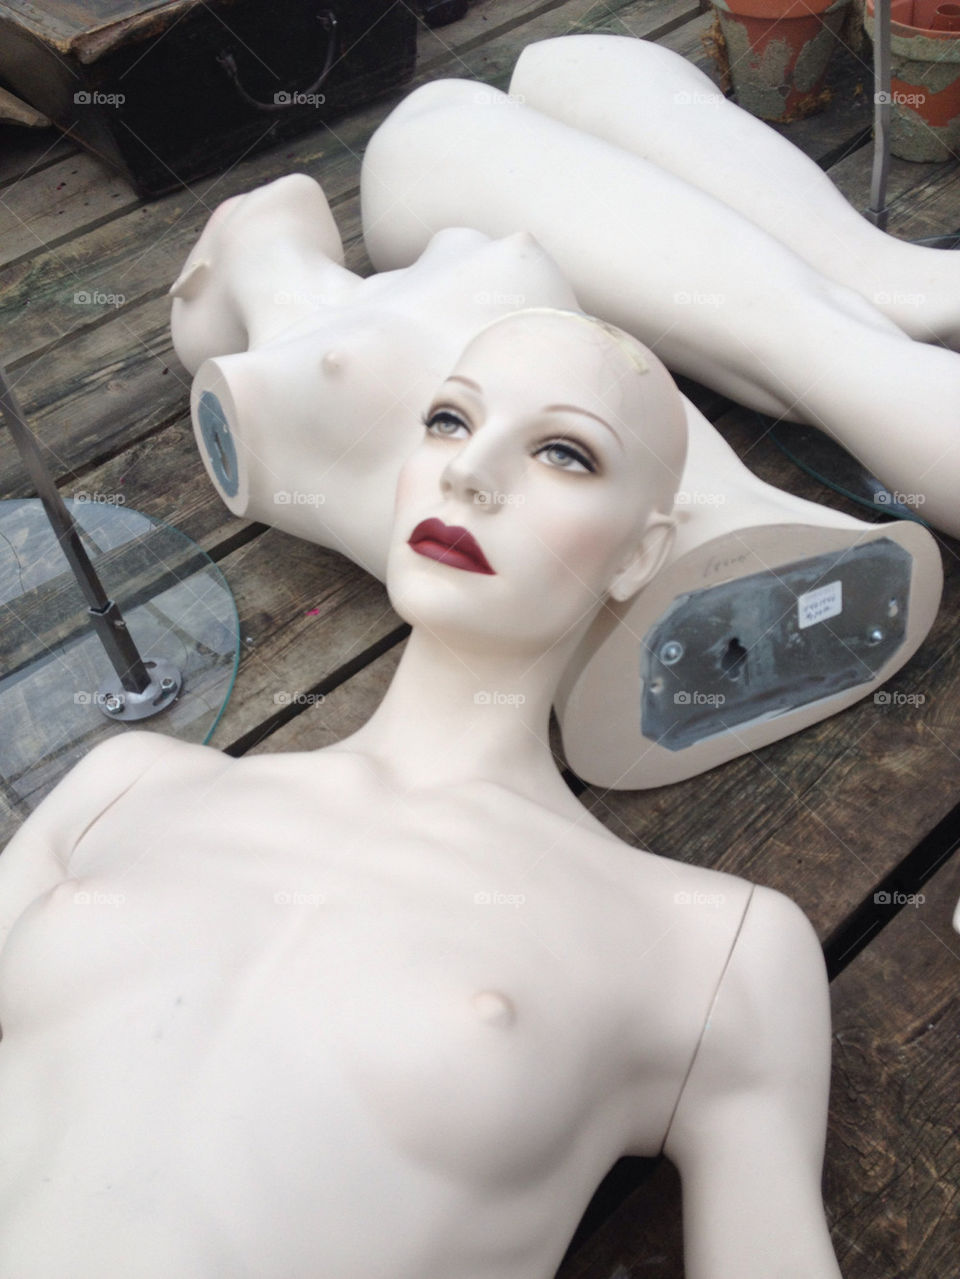 mannequins by bigouppets